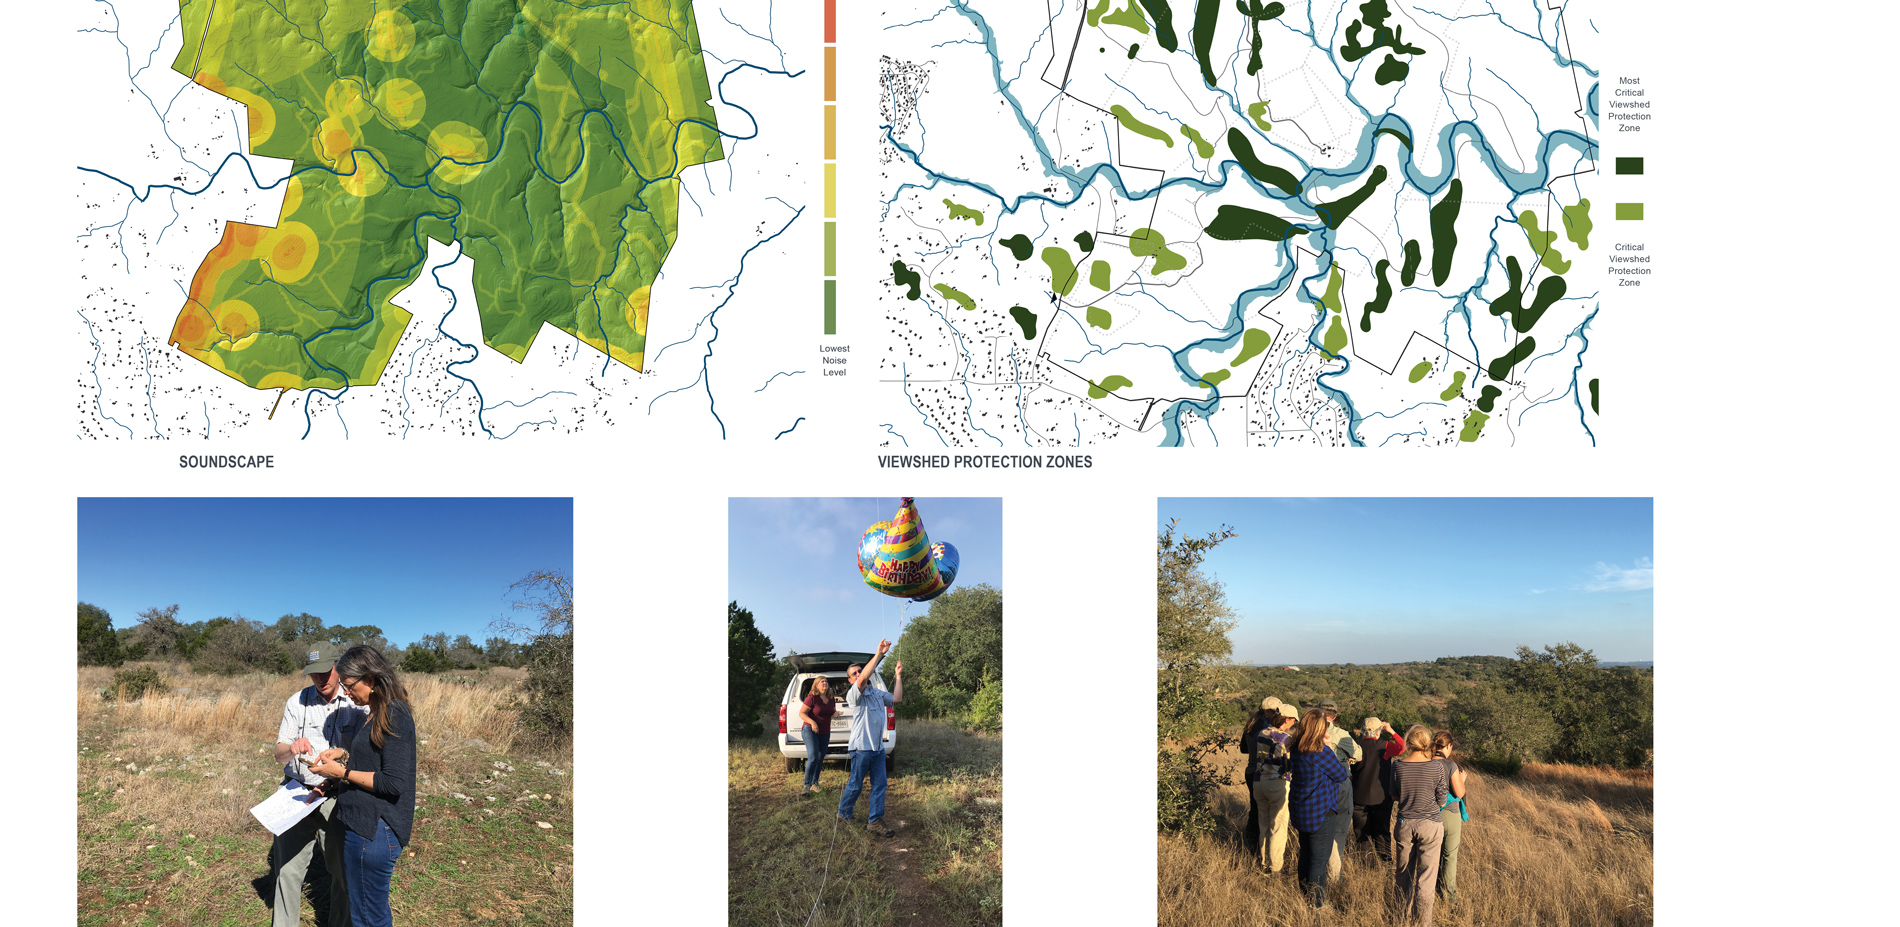 To immerse visitors in the landscape of the Texas Hill Country, soundscapes and viewsheds were analyzed. This unique GIS analysis included modeling fu…